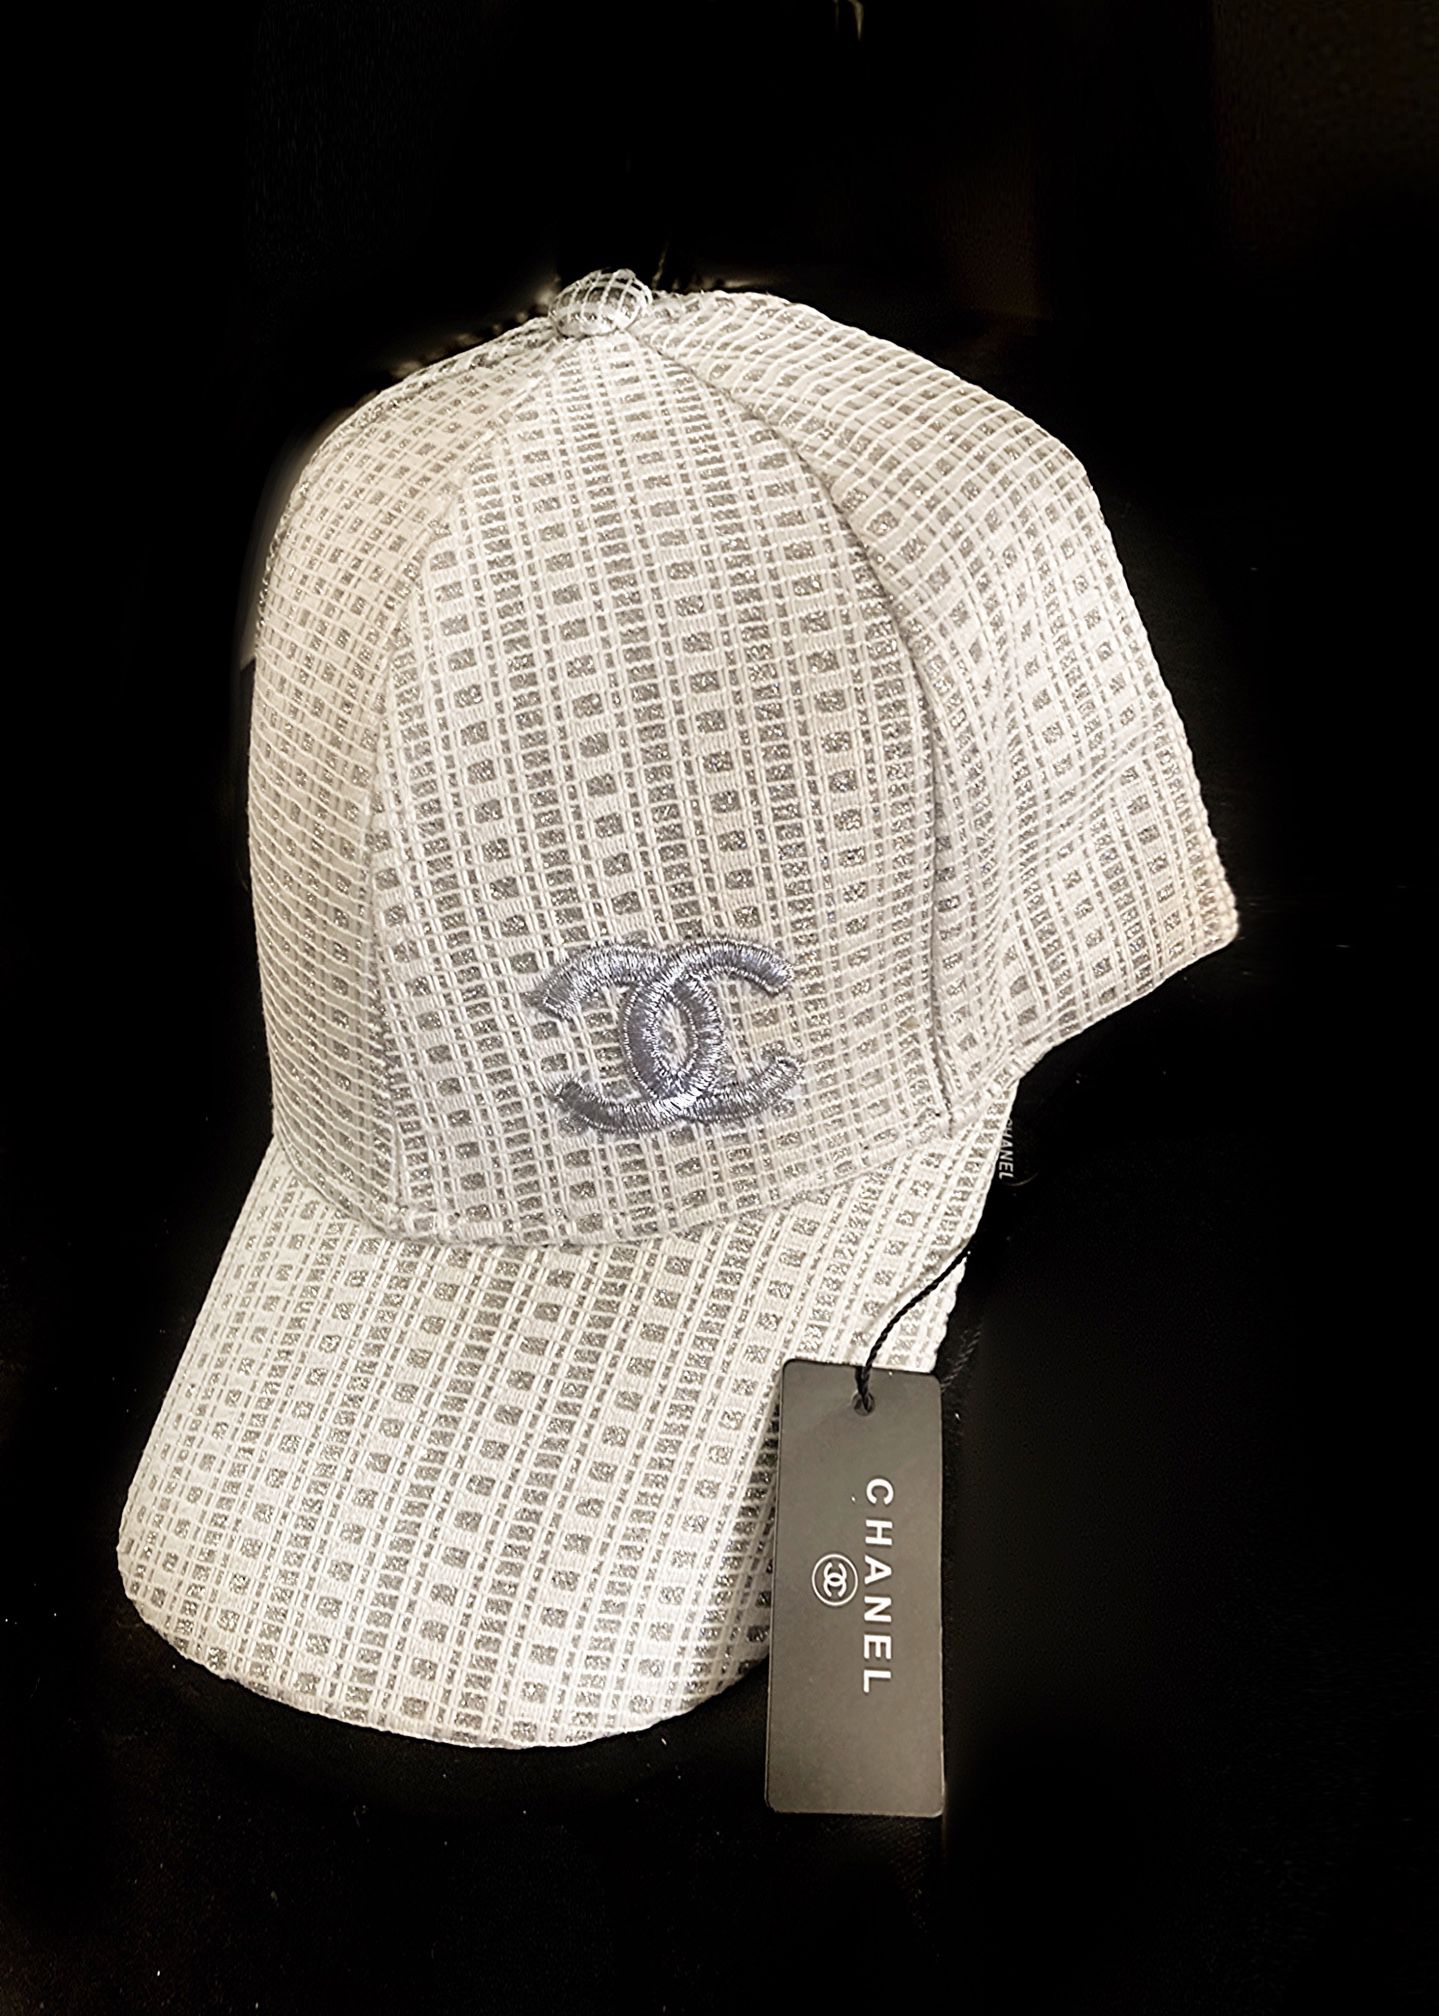 Nwt! Women's Adjustable Chanel Baseball Hat. BagWhite Accented